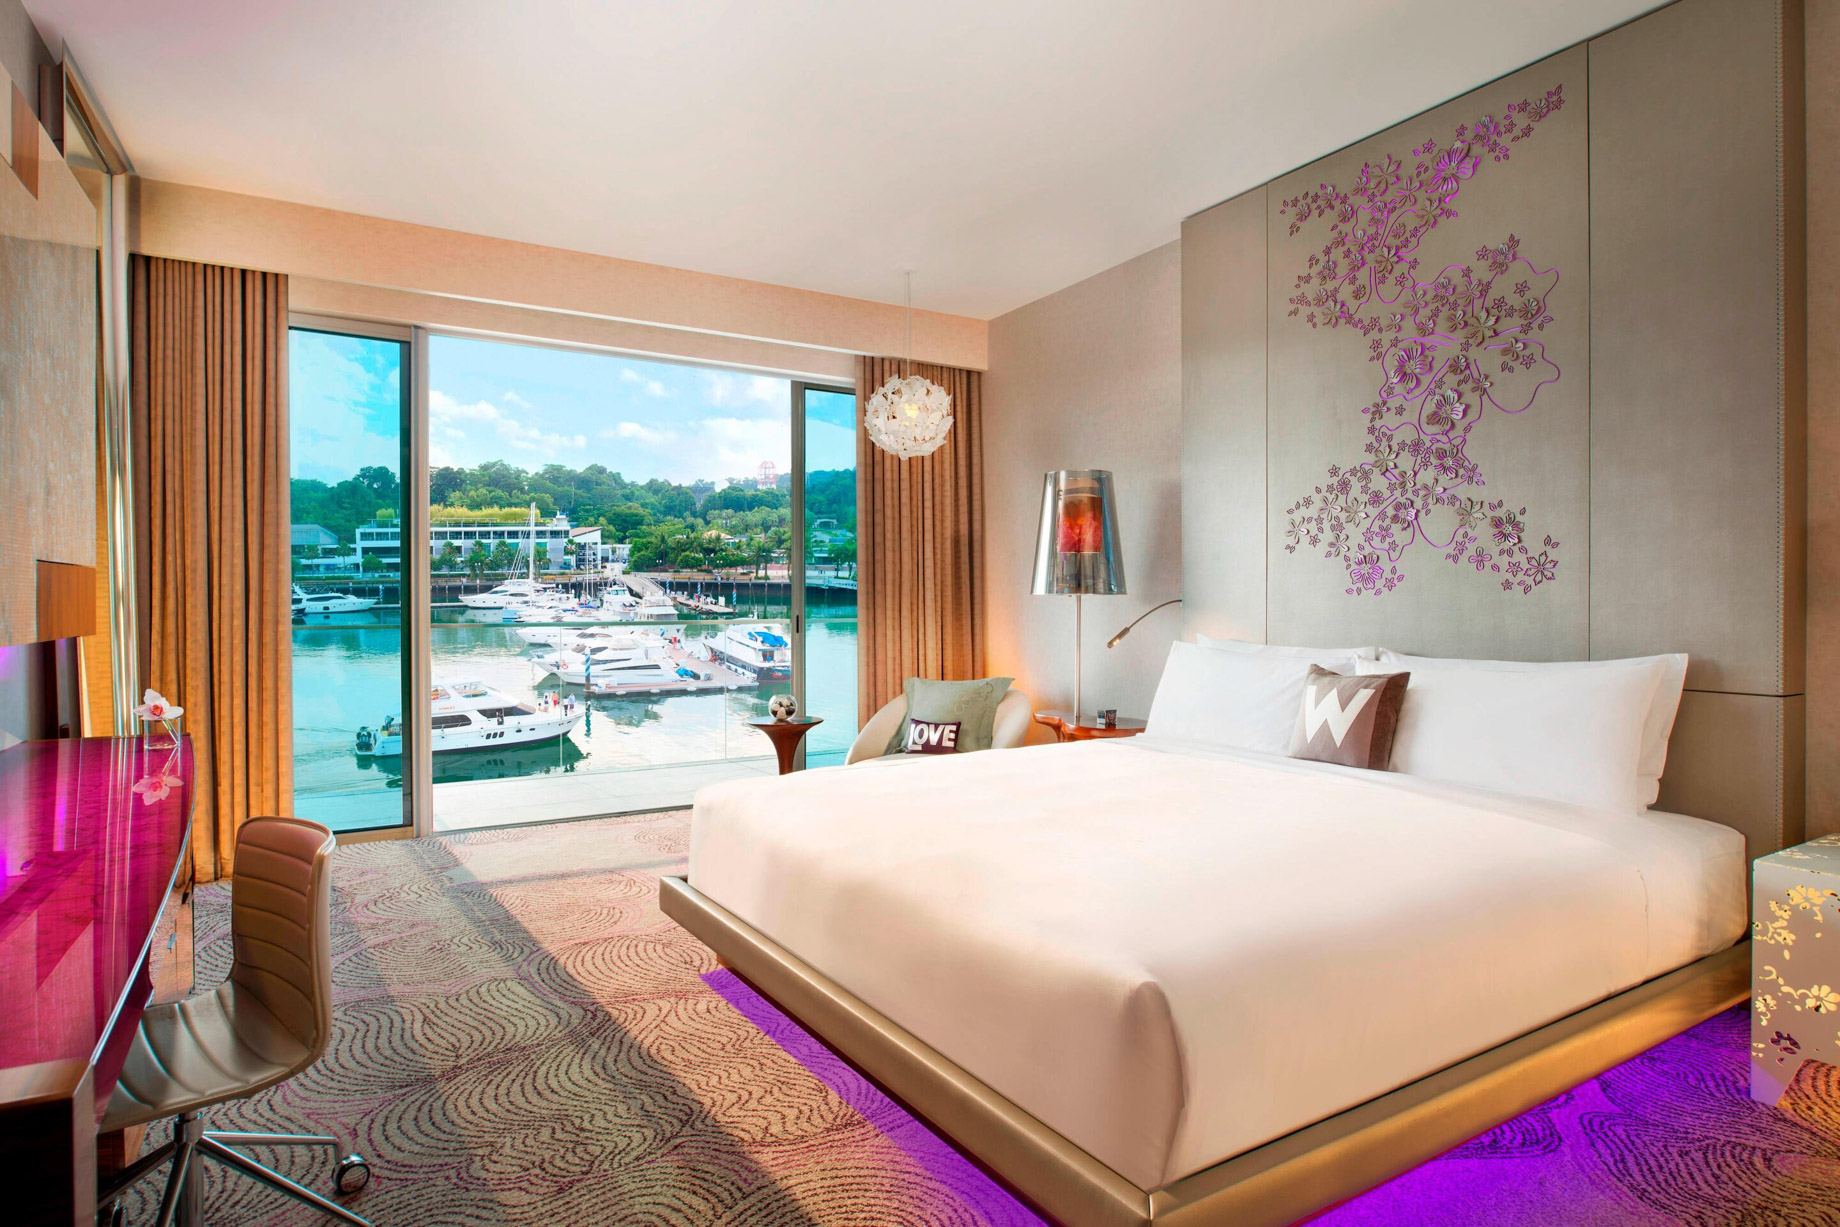 W Singapore Sentosa Cove Hotel – Singapore – Spectacular King Guest Room